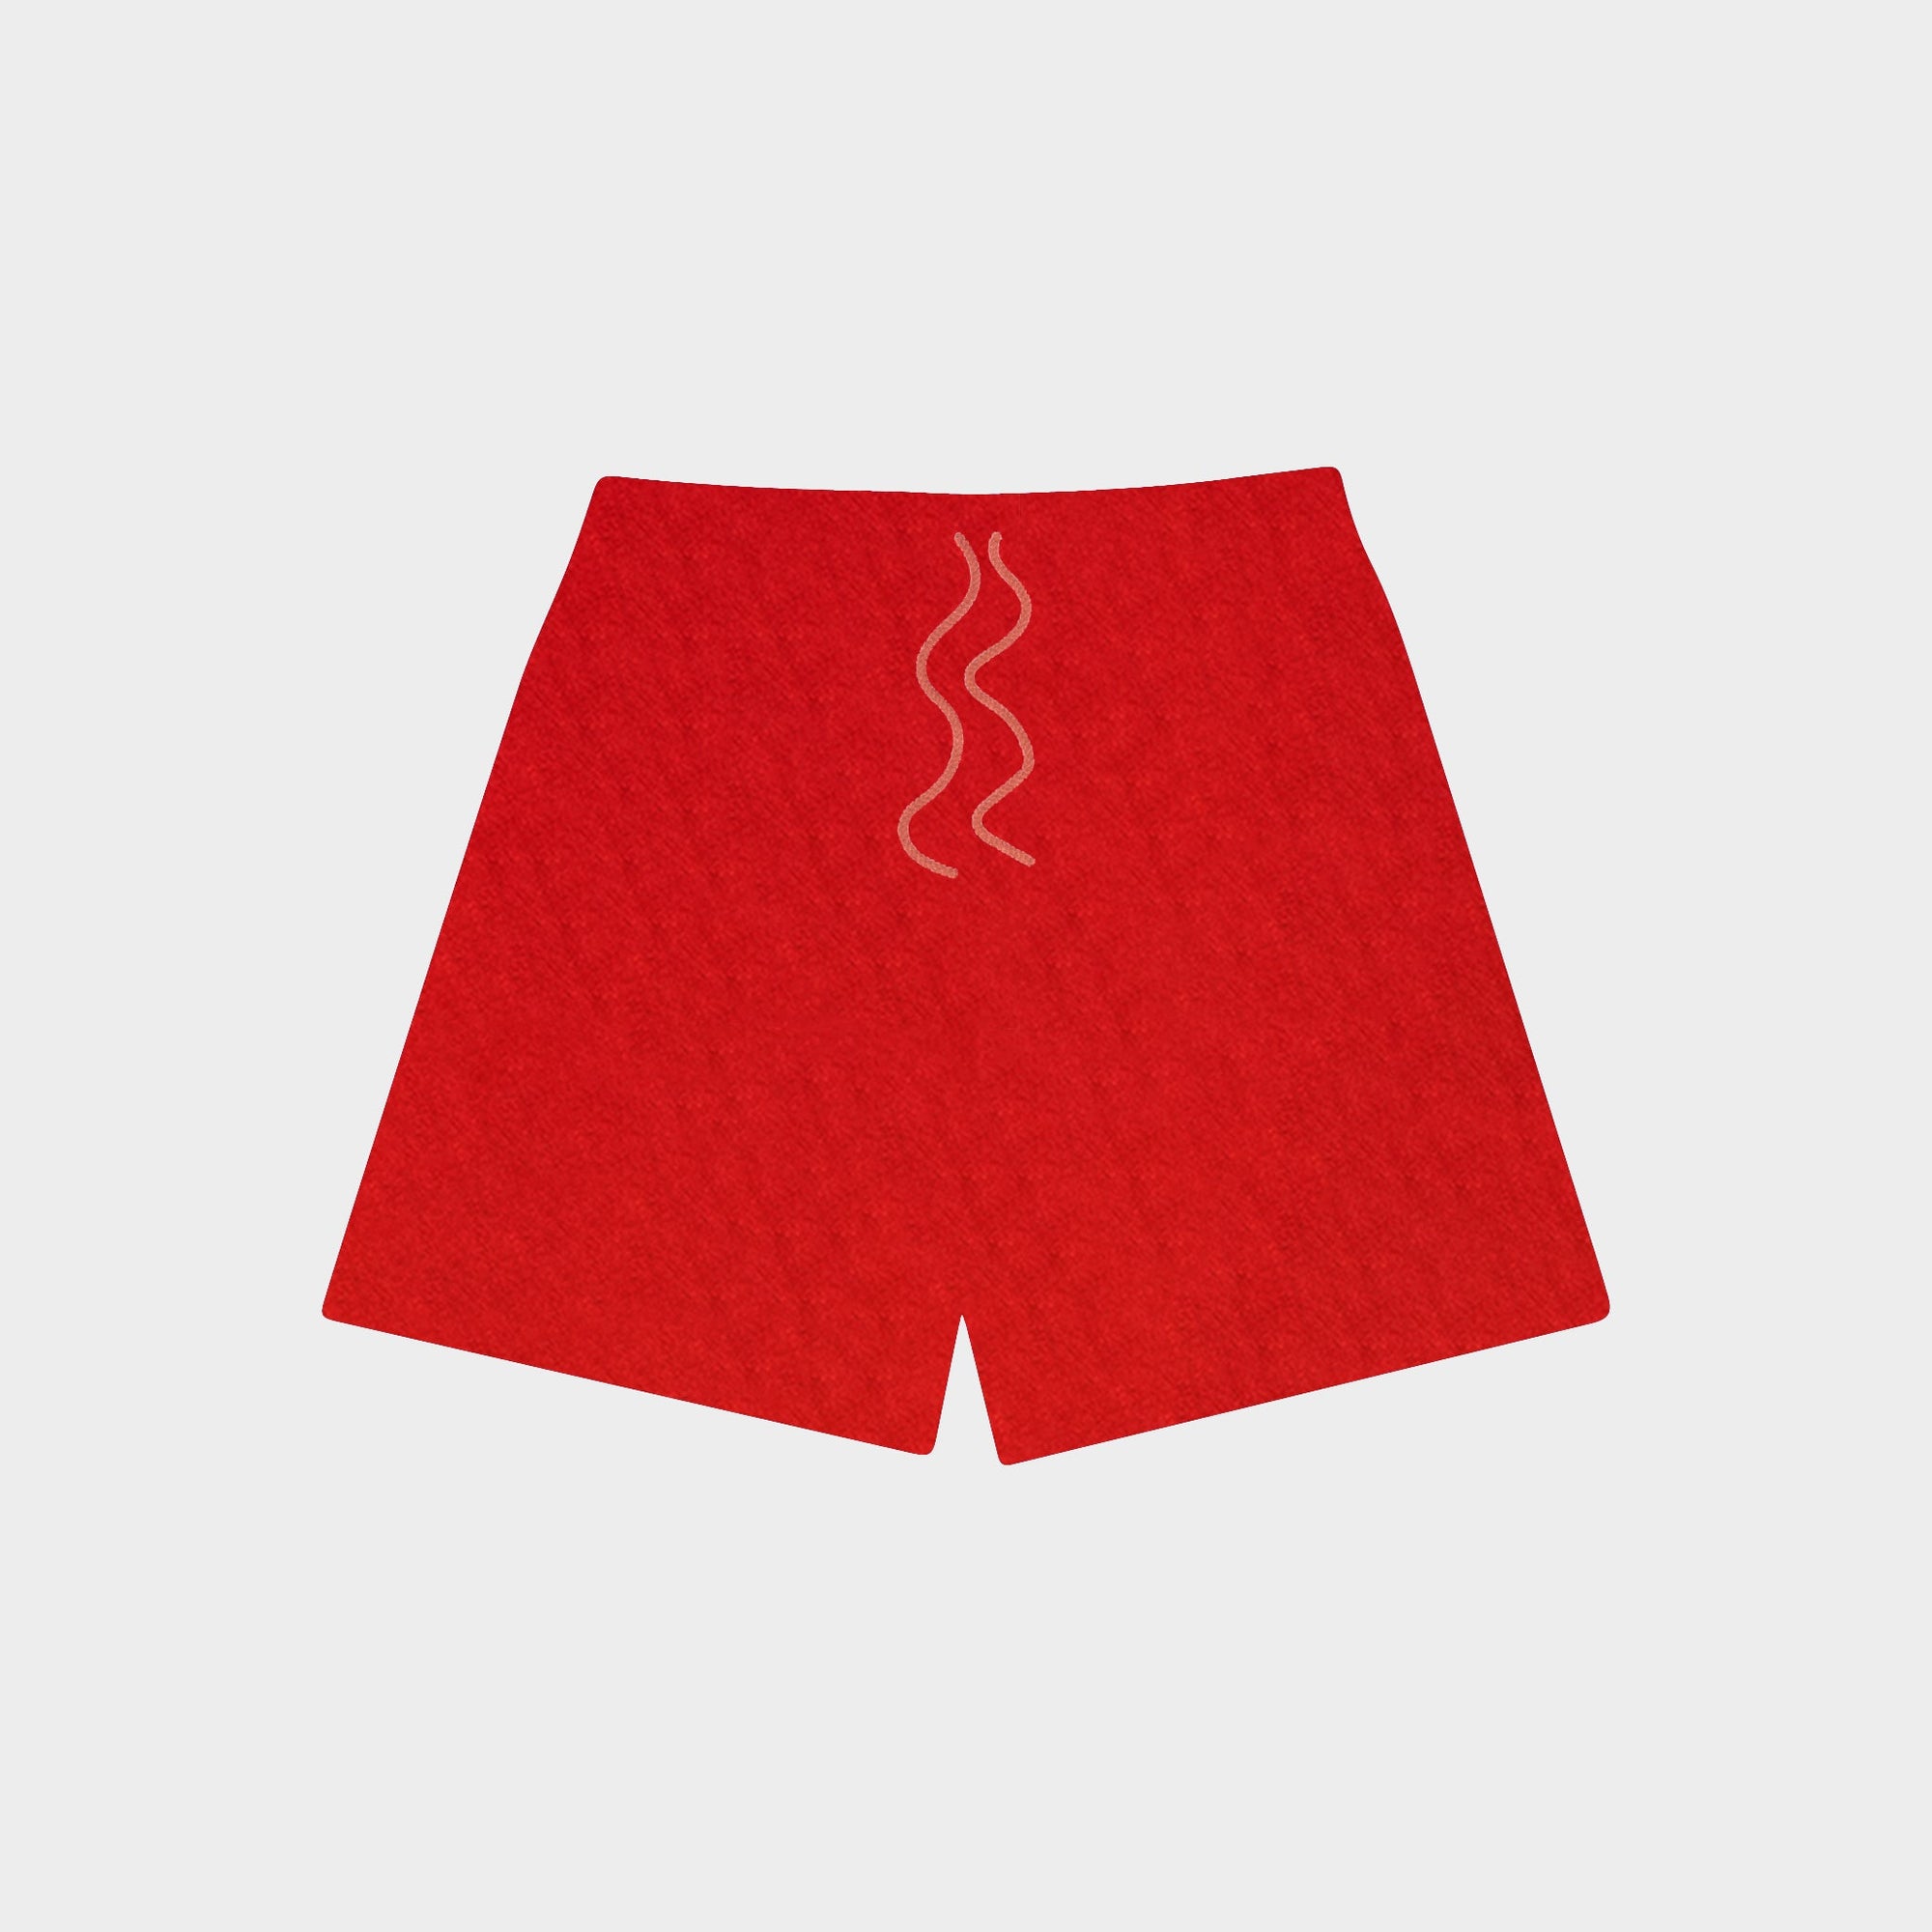 Just Towel Shorts - Red - RED LETTERS